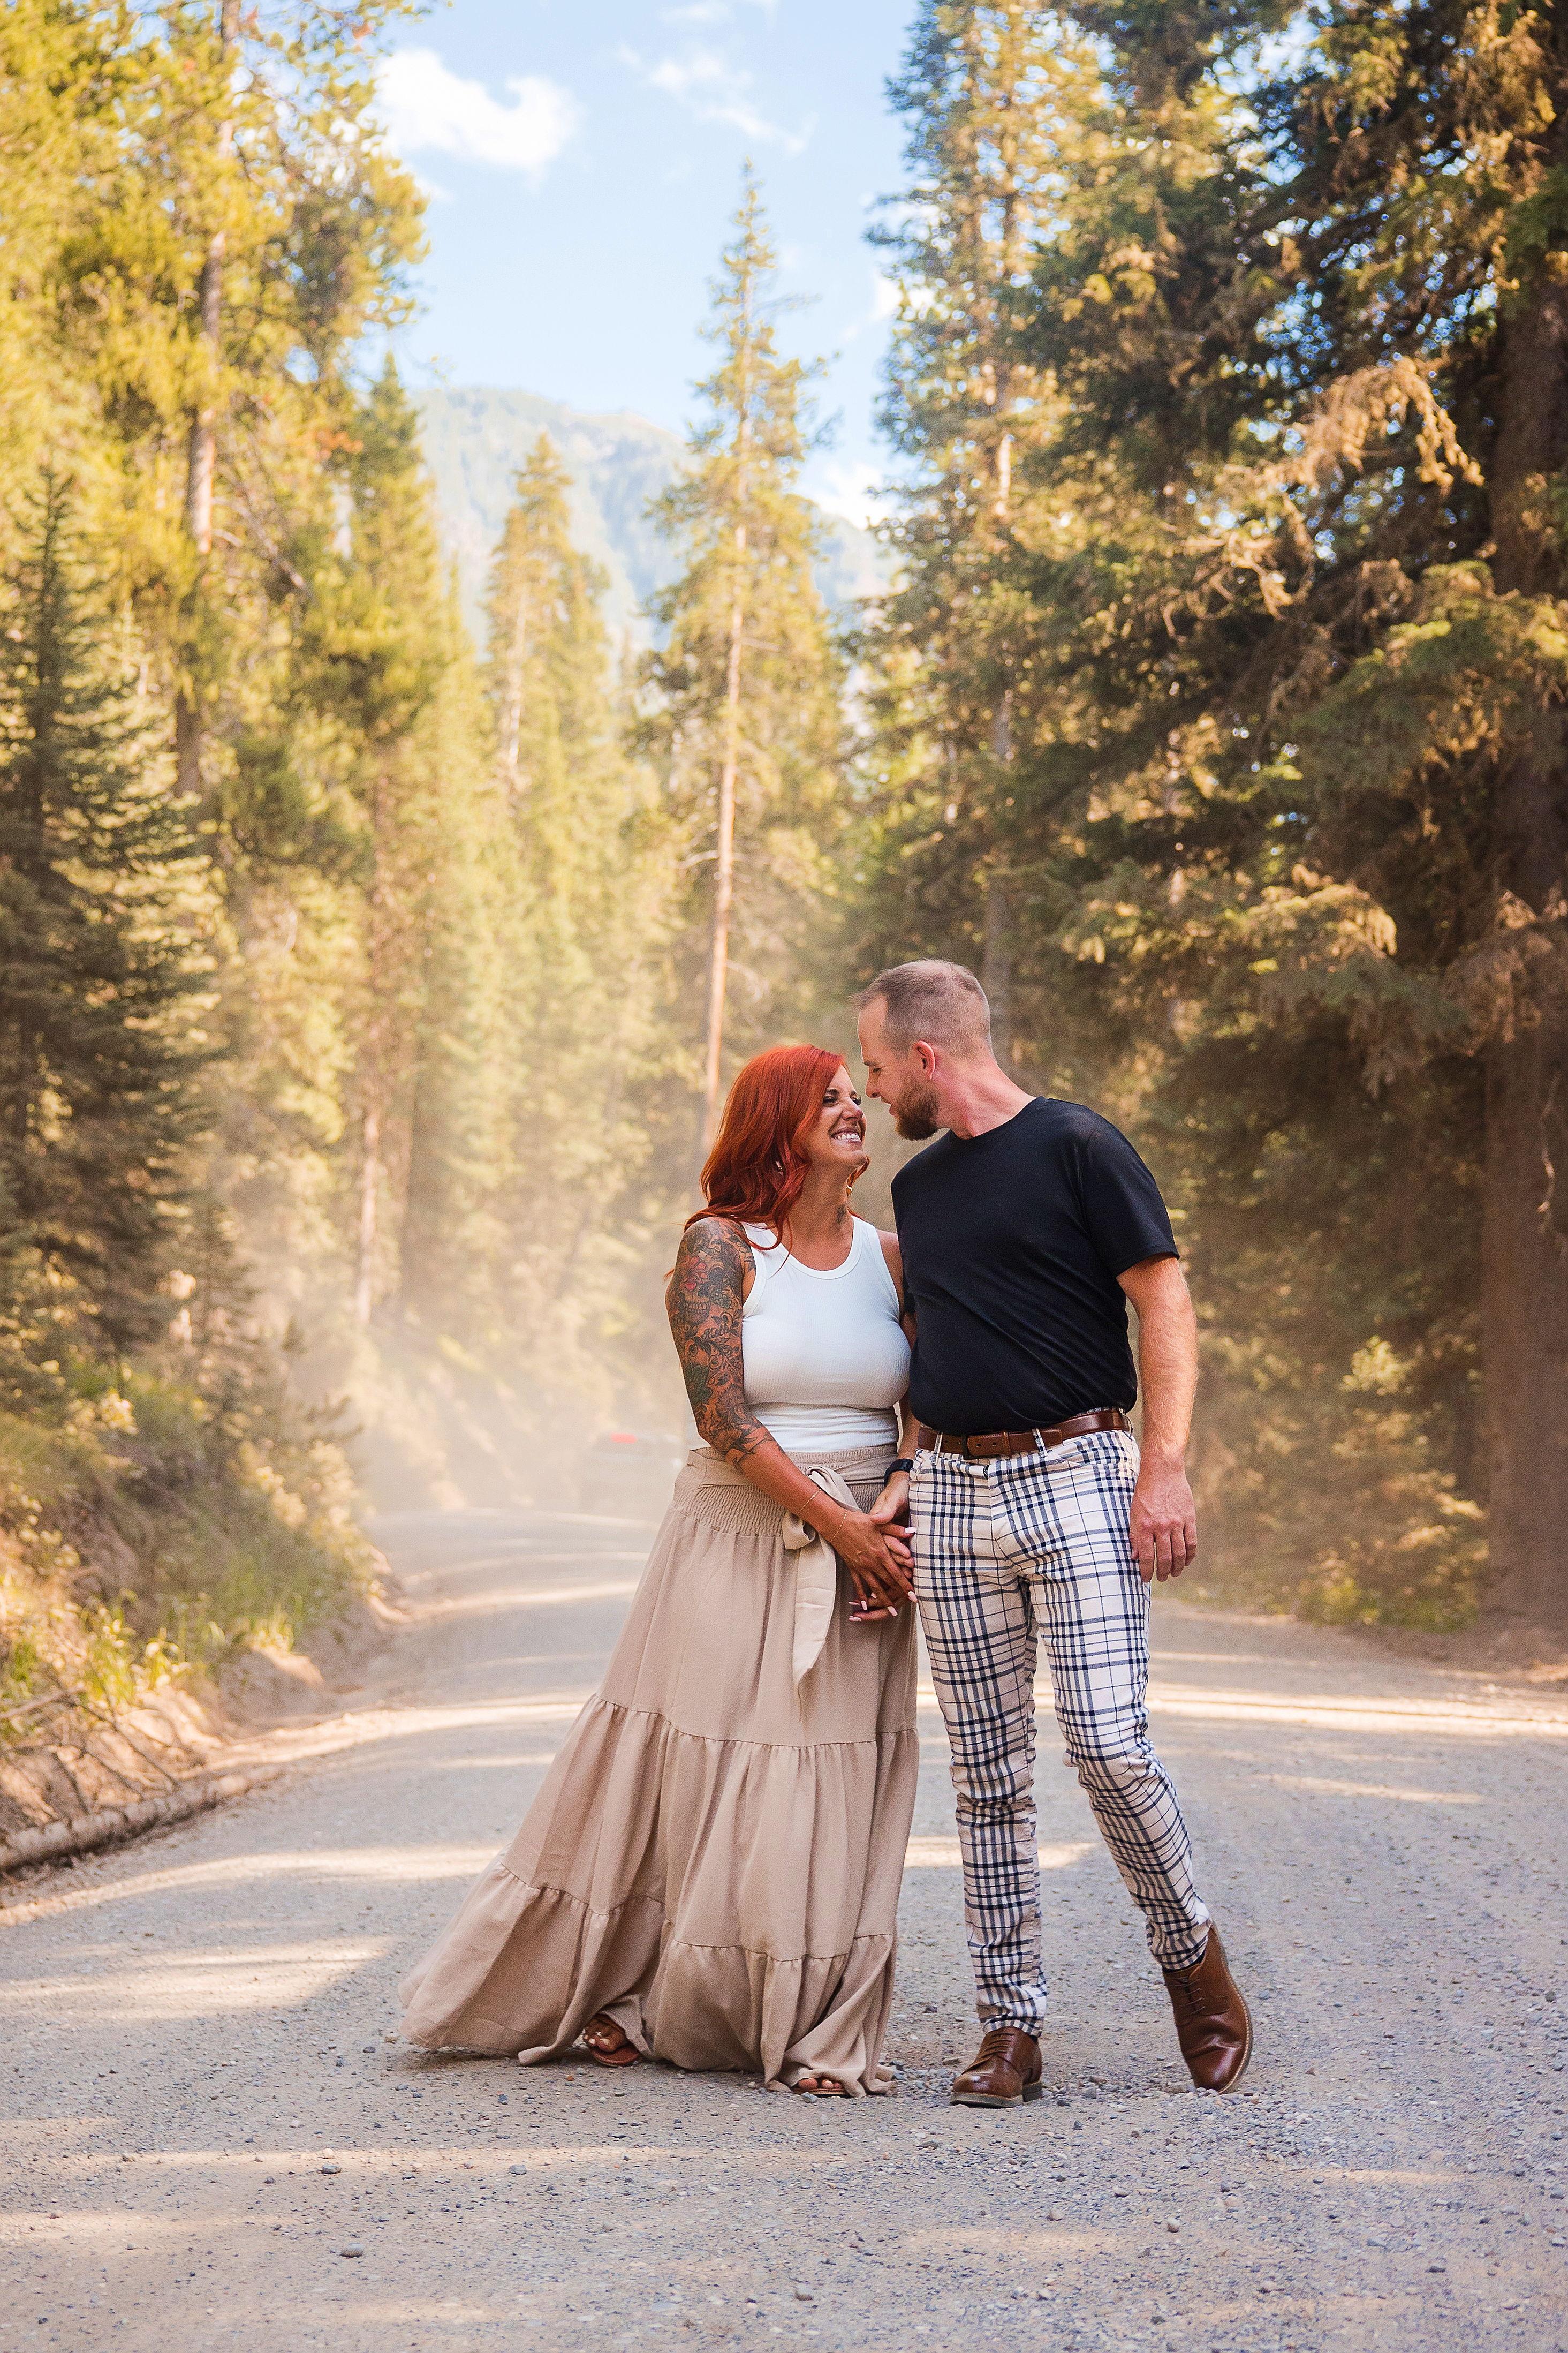 The Wedding Website of Ashlee Marie and Zachary Lunder